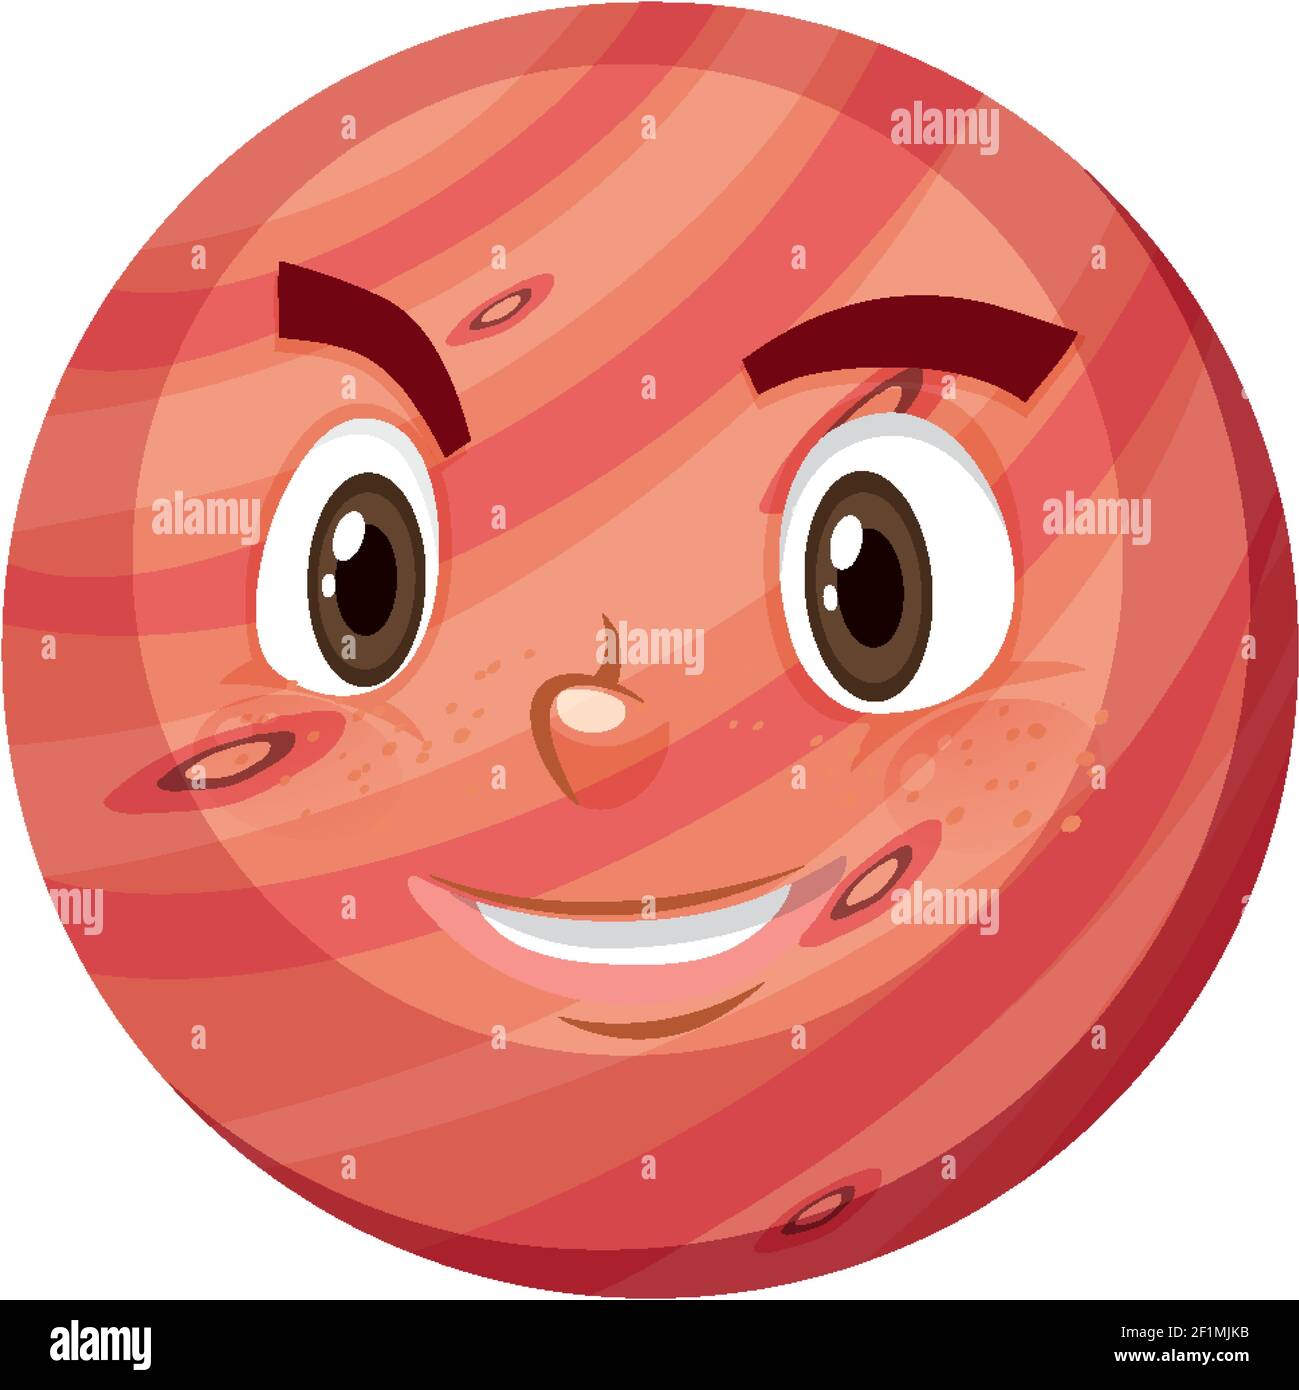 Mars cartoon character with happy face expression on white background illustration Stock Vector